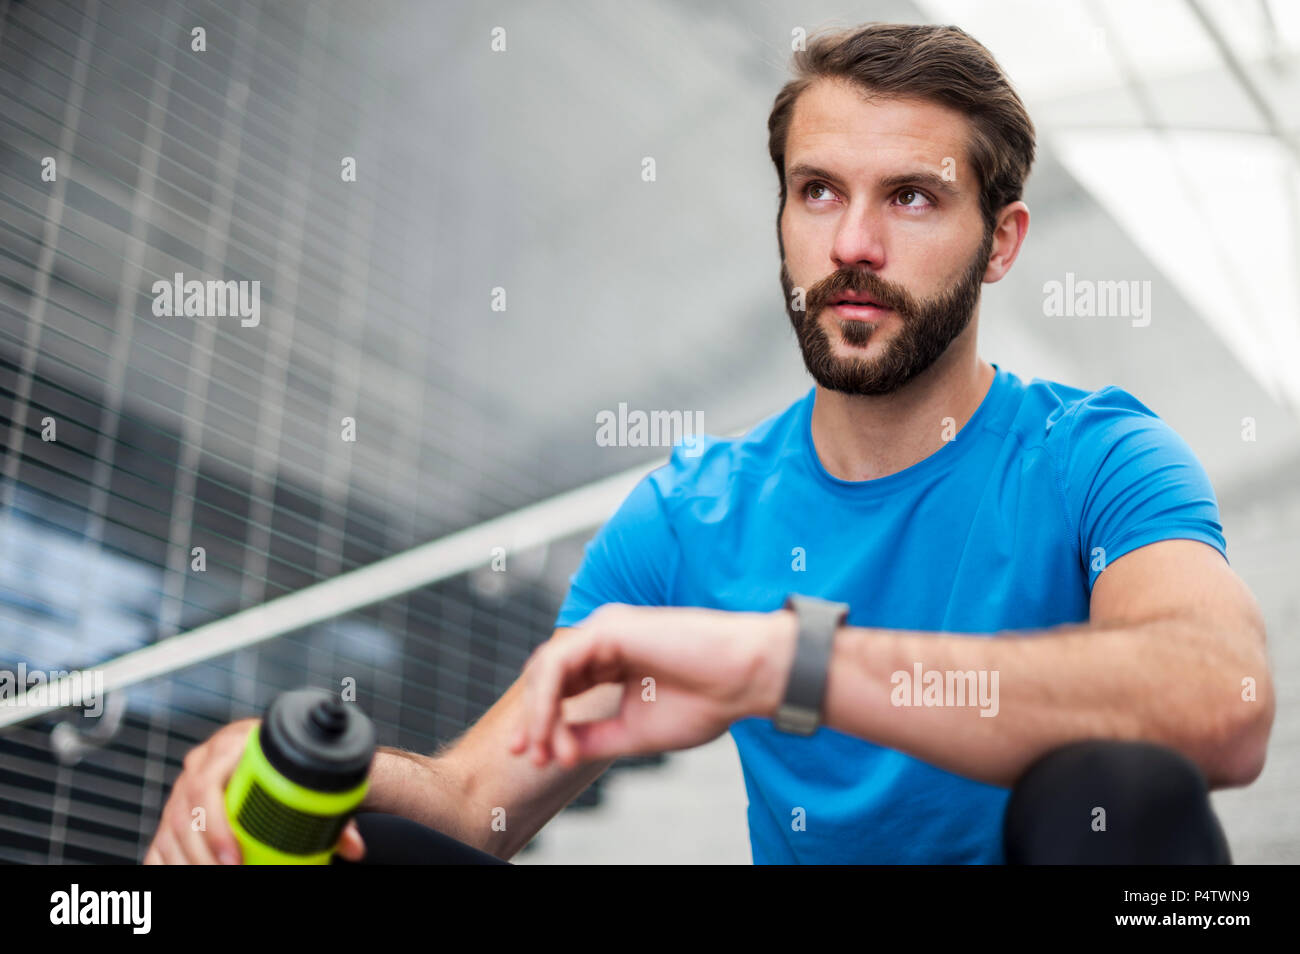 Man sitting on stairs having a break from running Stock Photo